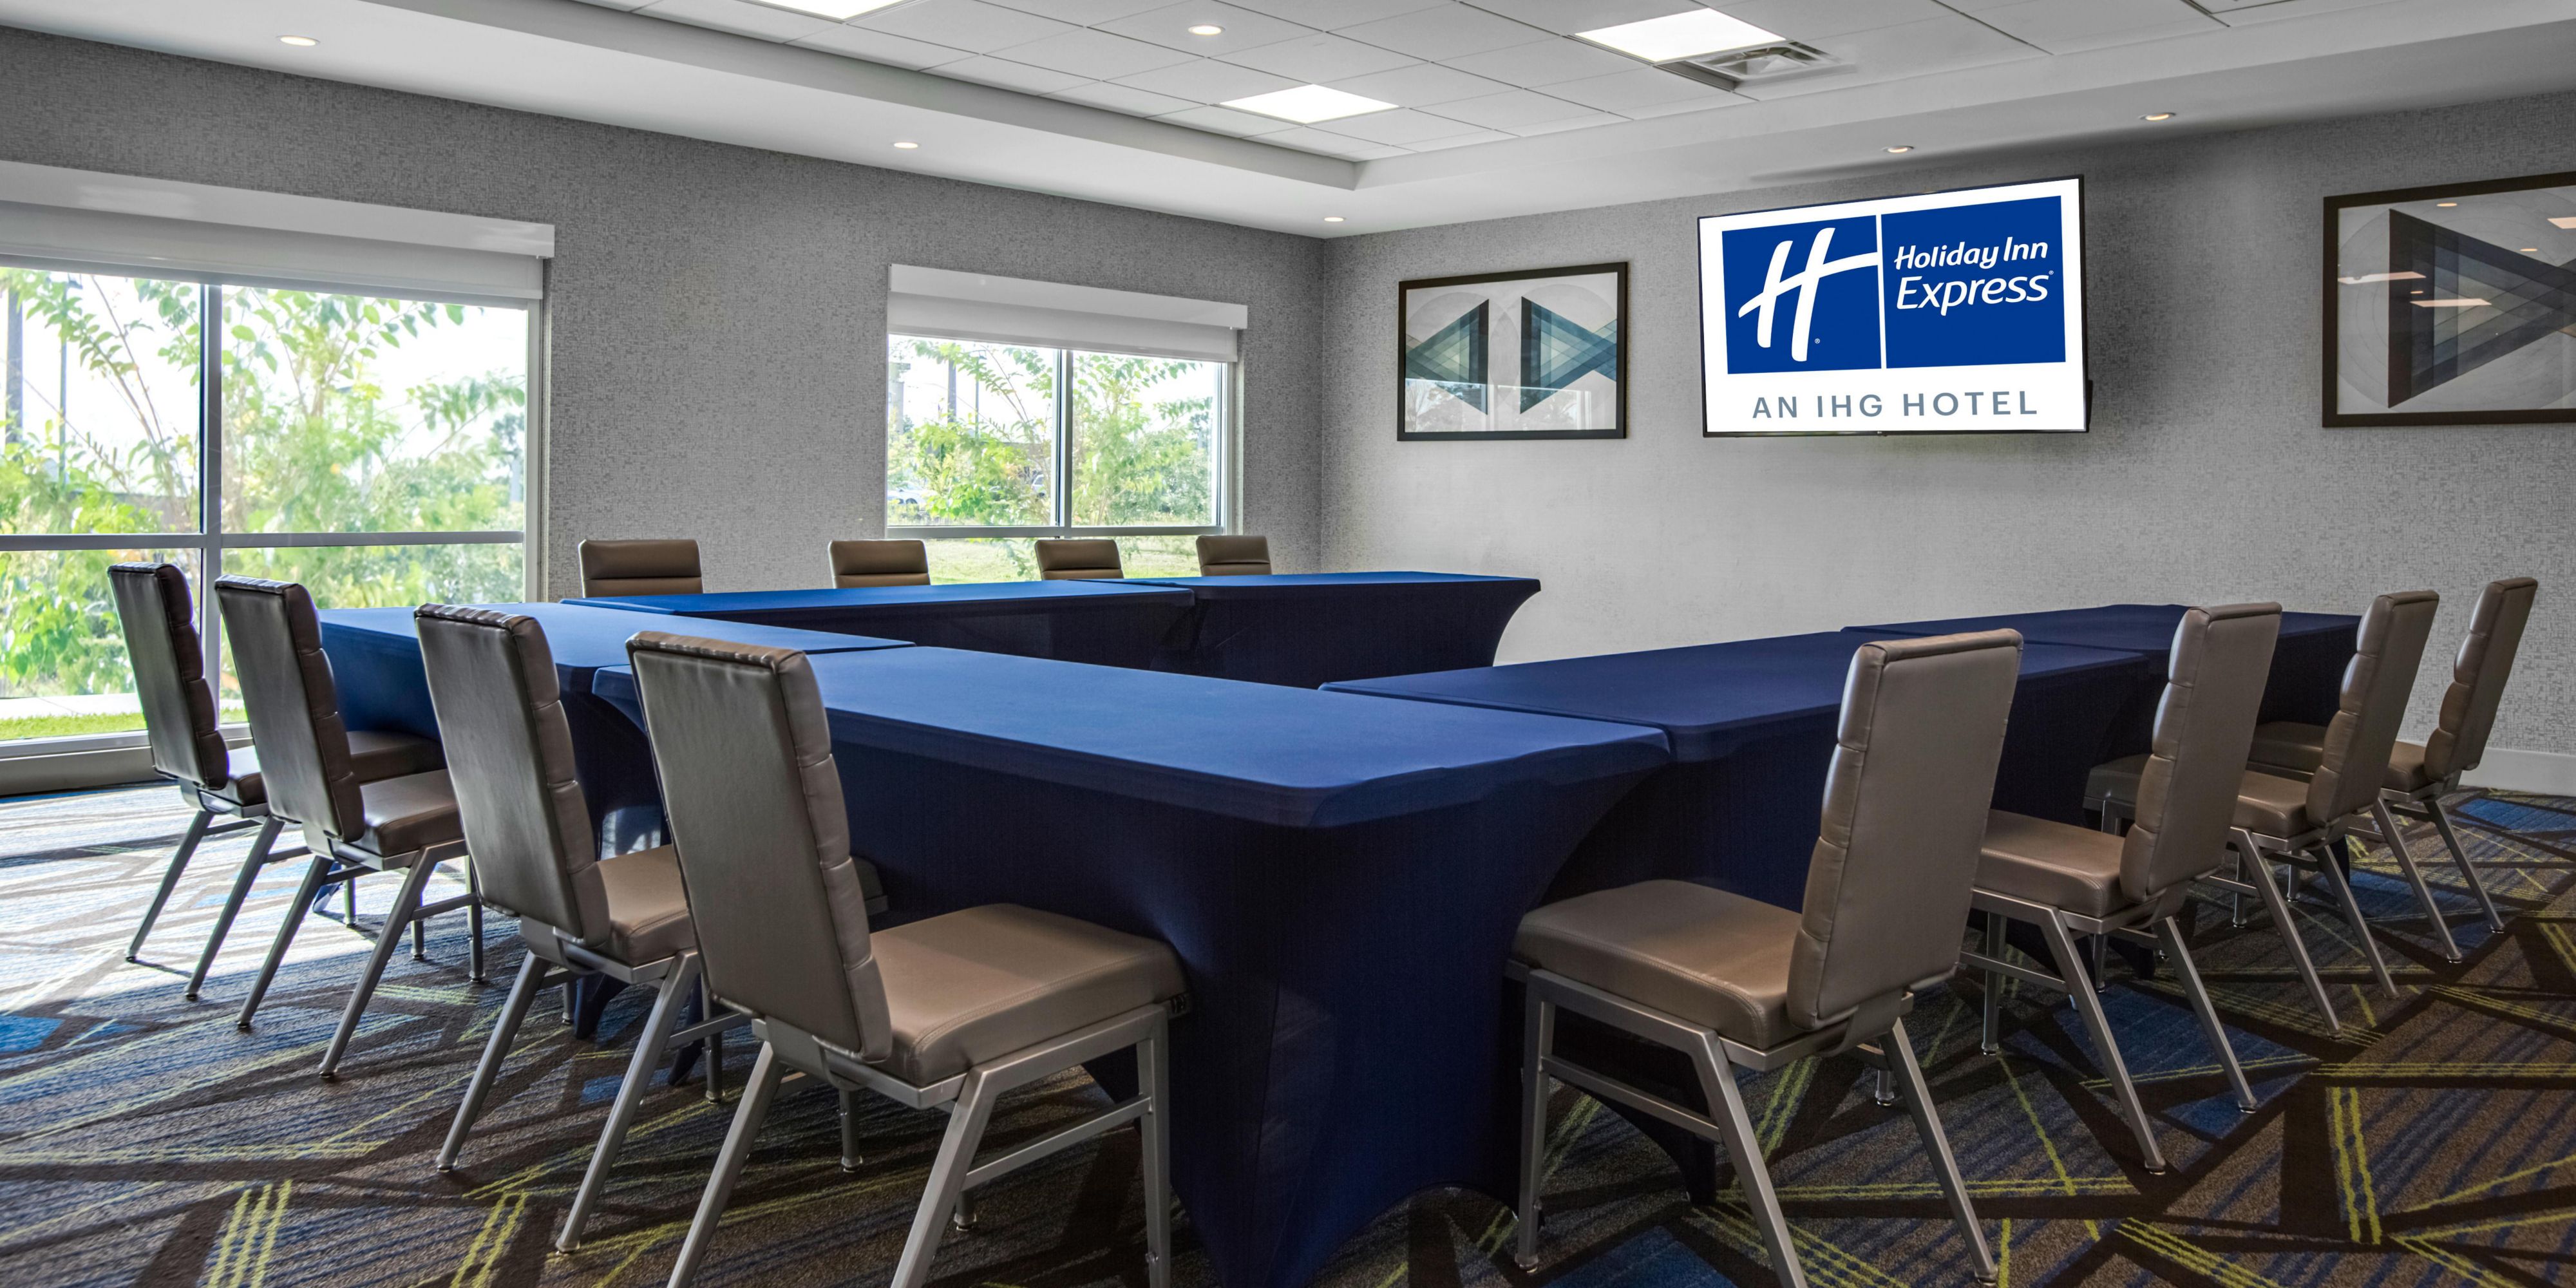 With over 1500 square feet of flexible space, the Holiday Inn Express & Suites Sanford - Lake Mary is the perfect space for your next intimate event or meeting. Spaces come equipped with everything needed to make your meeting or event successful including custom setup, projectors, TVs, whiteboards, flip charts and more. 